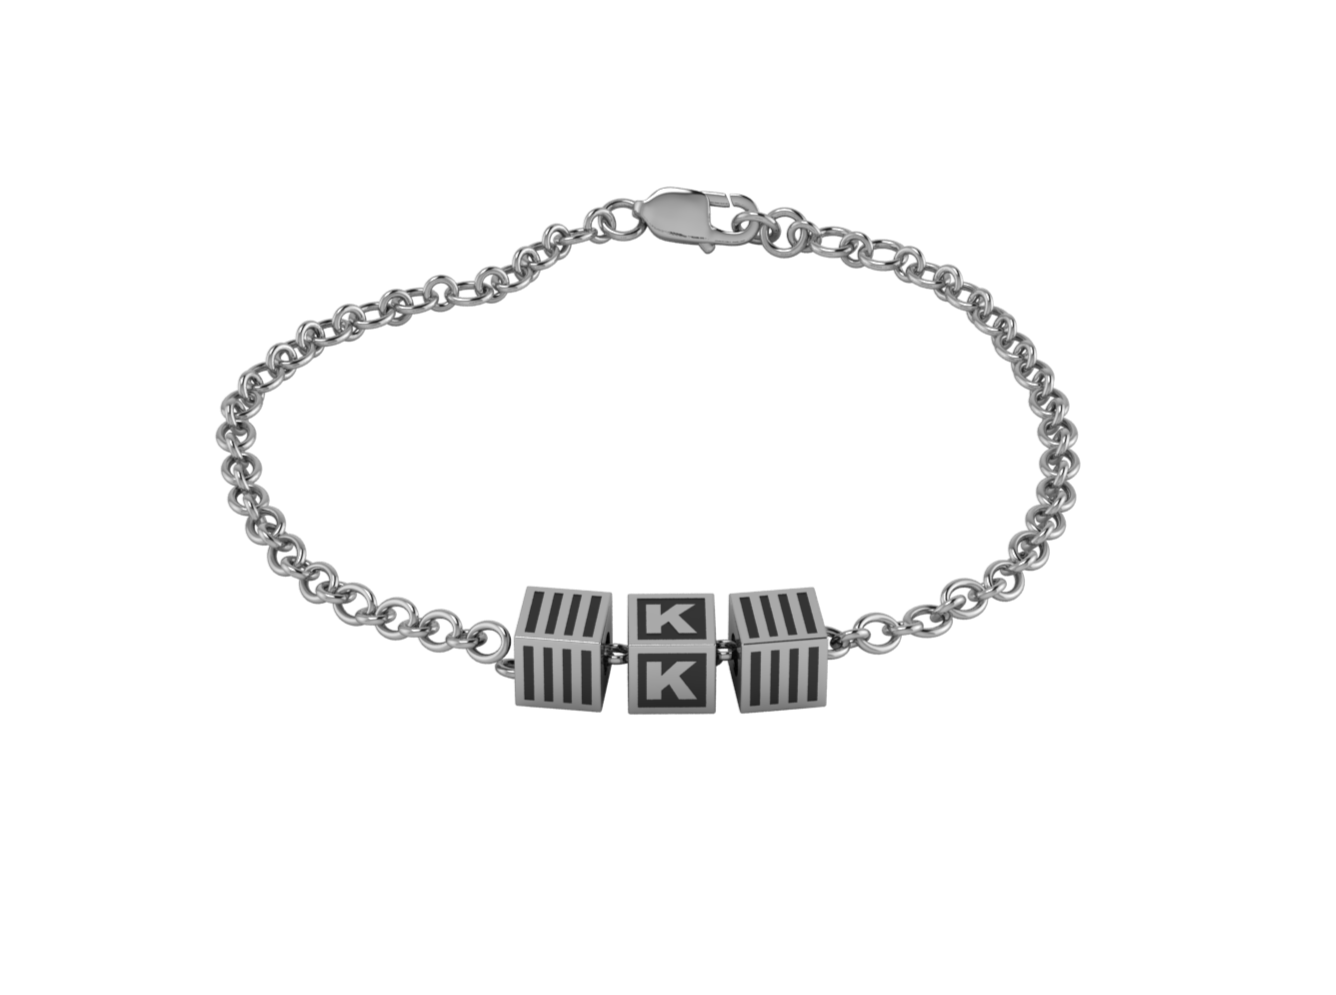 Make Chester Proud Black Silicone Bracelet | Featured | Chester Bennington  Store